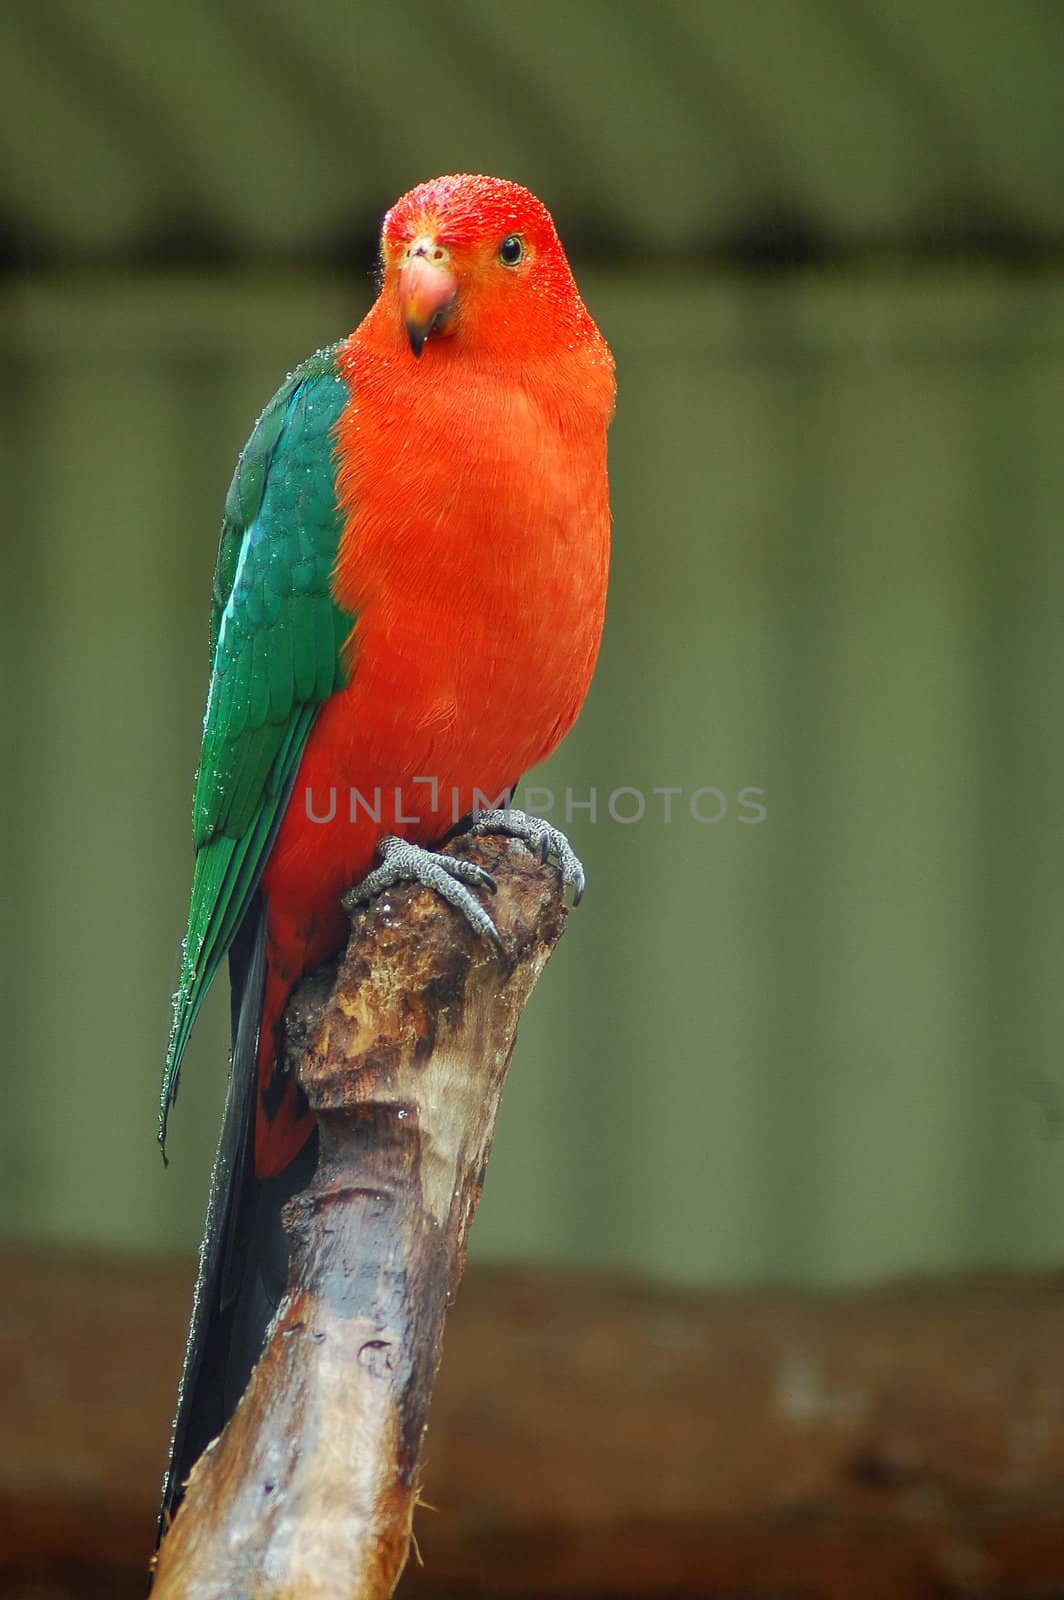 red parrot with green wings sitting on a tree, photo taken in sydney zoo